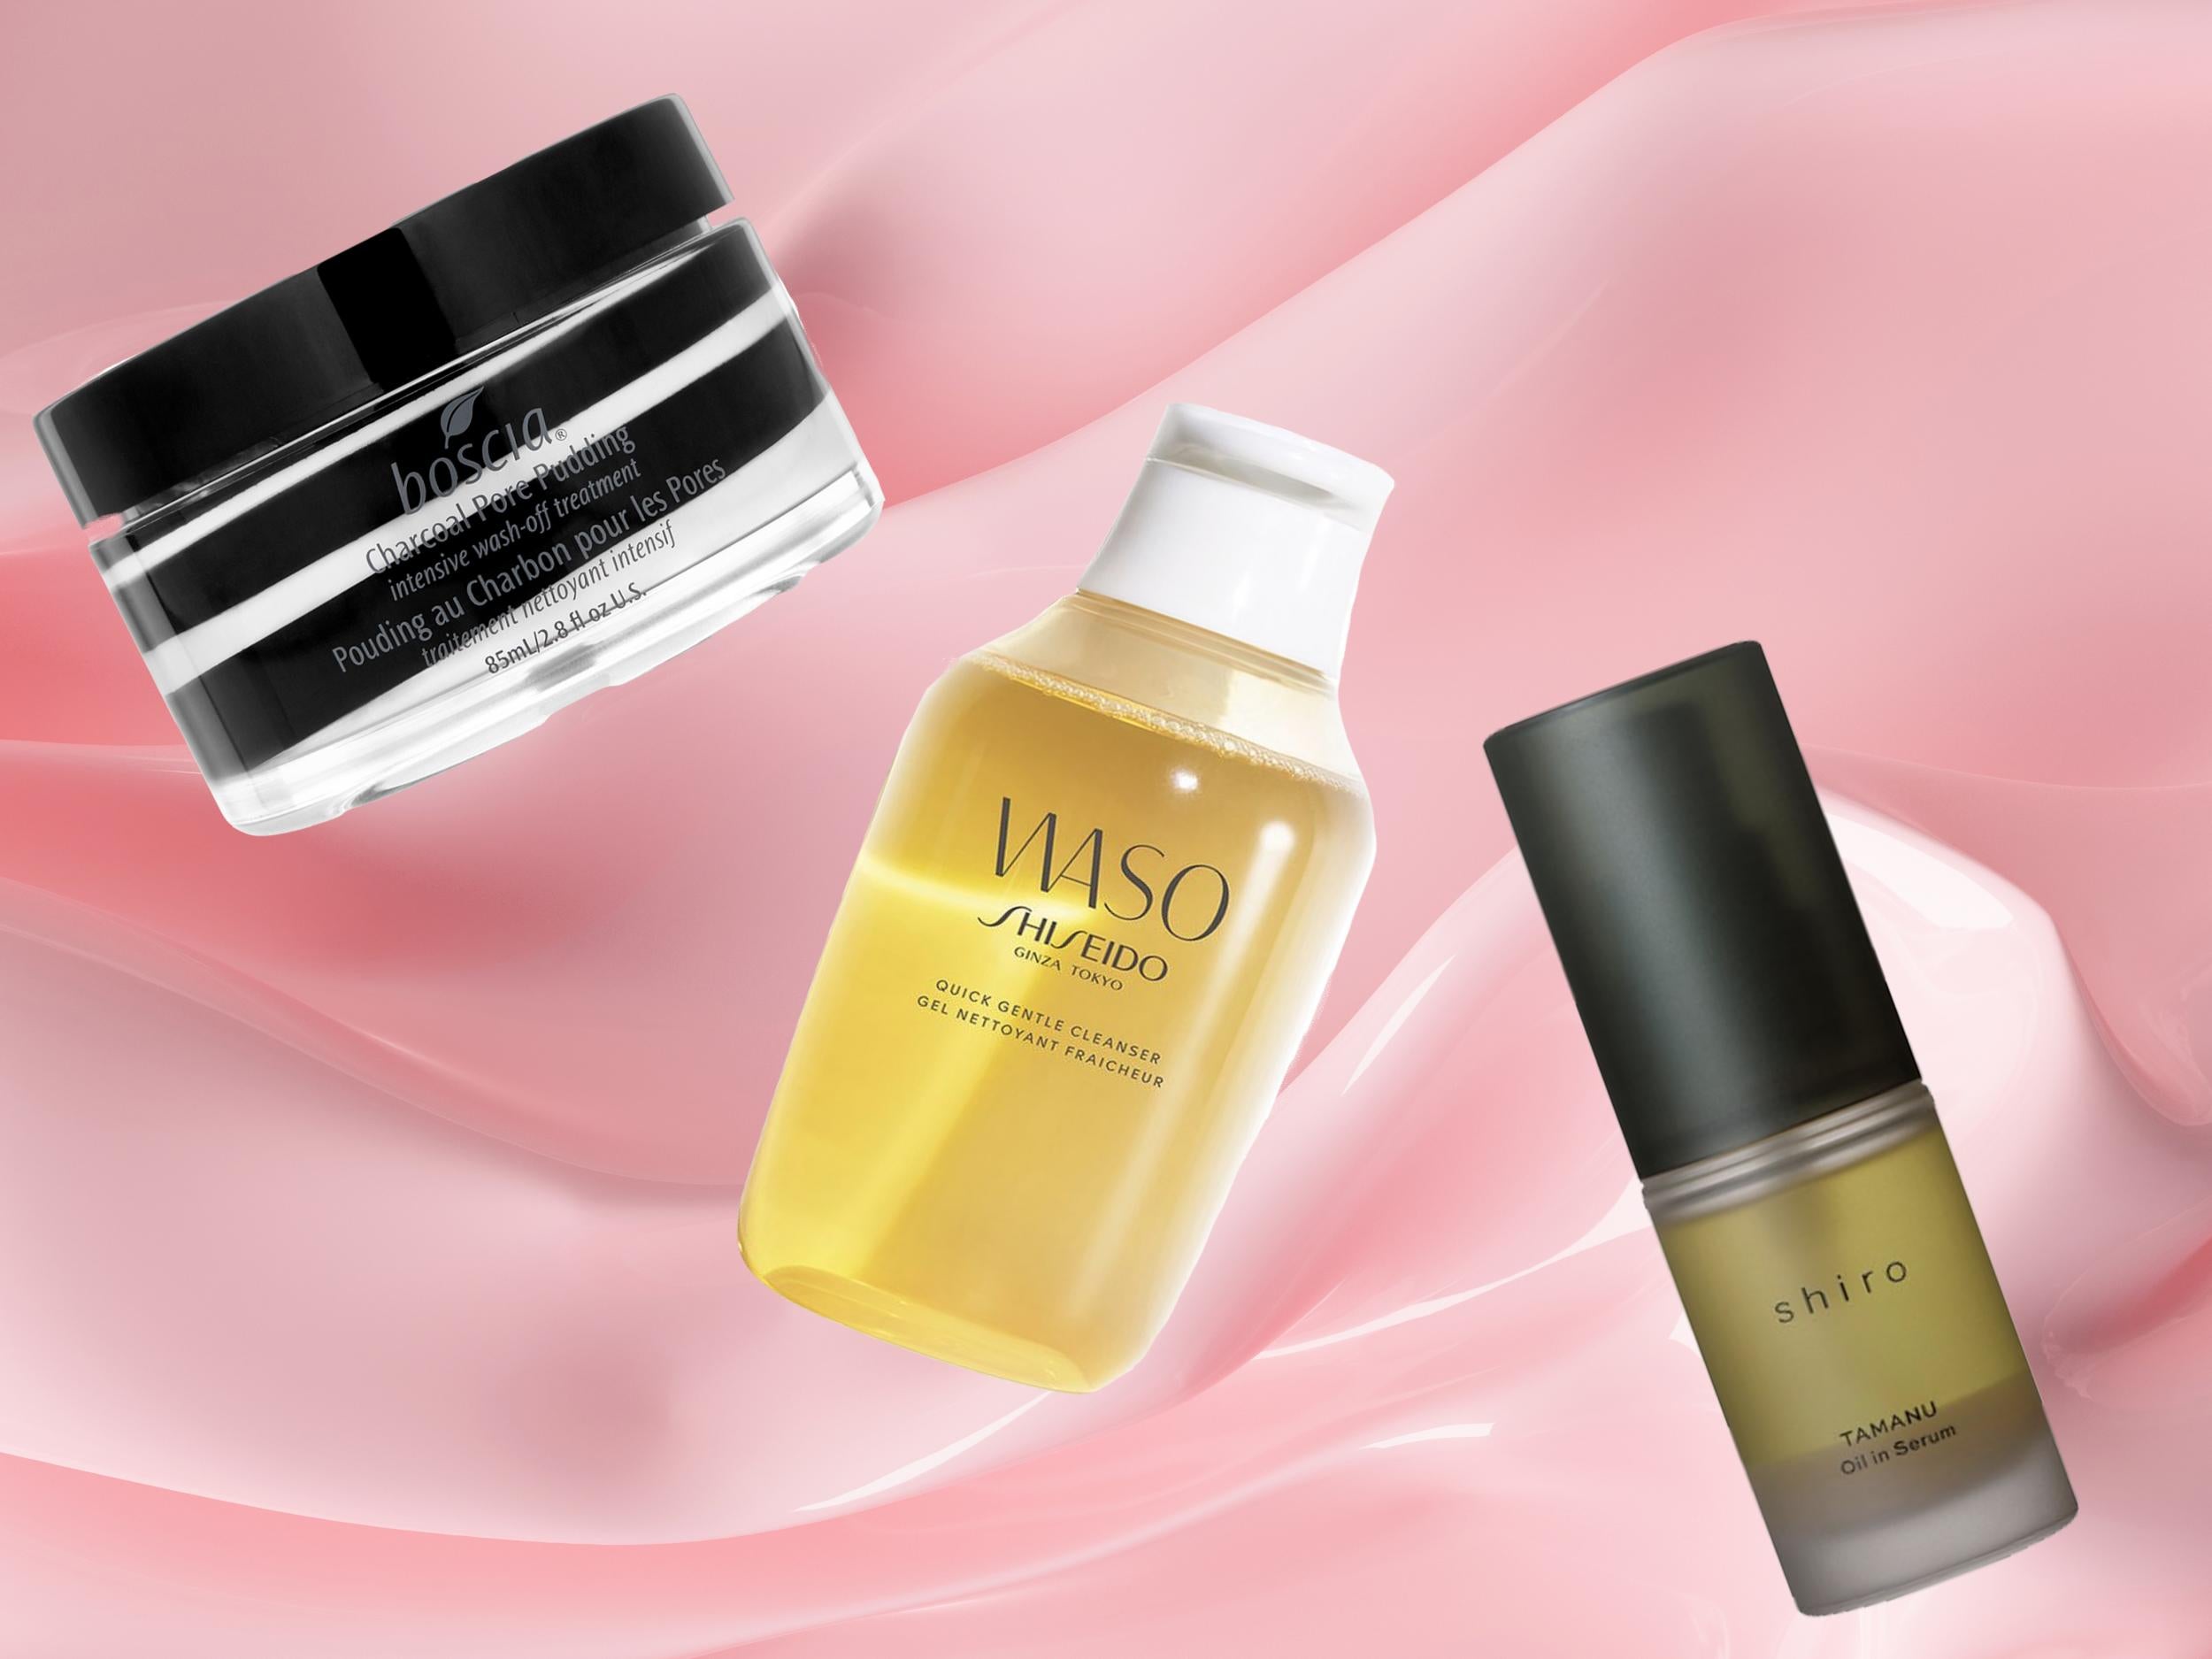 A Complete Guide To 25 Of The Best Japanese Skincare Brands – Japanese Taste